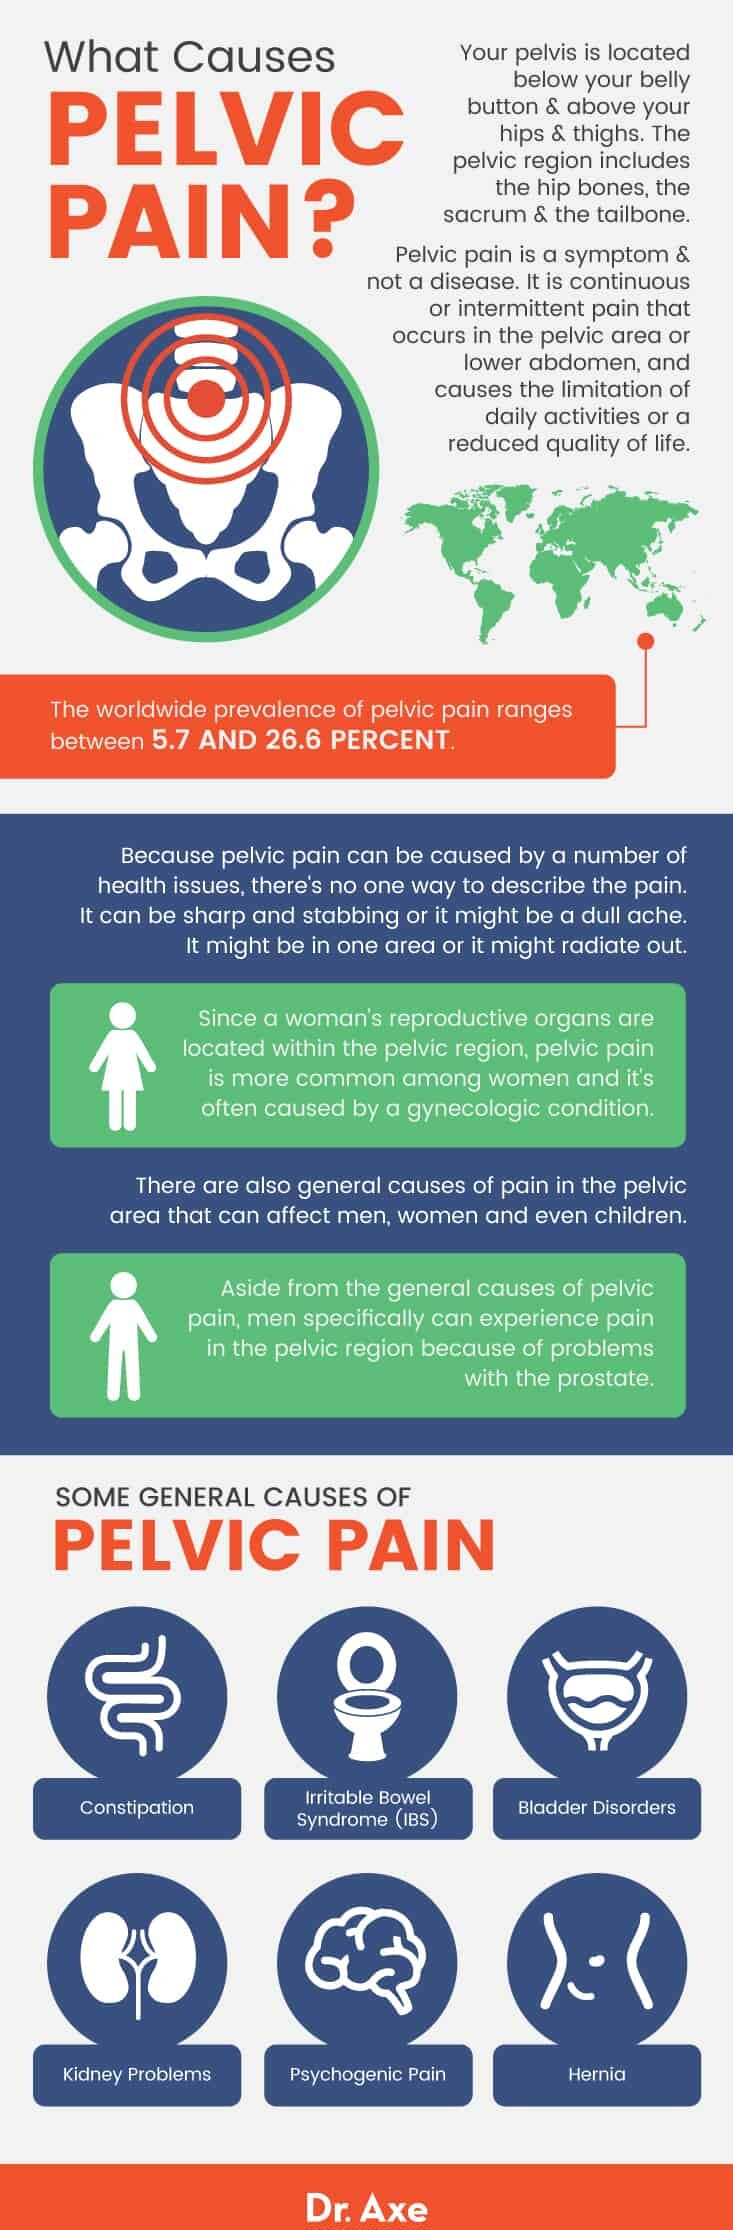 What causes pelvic pain?- Dr. Axe